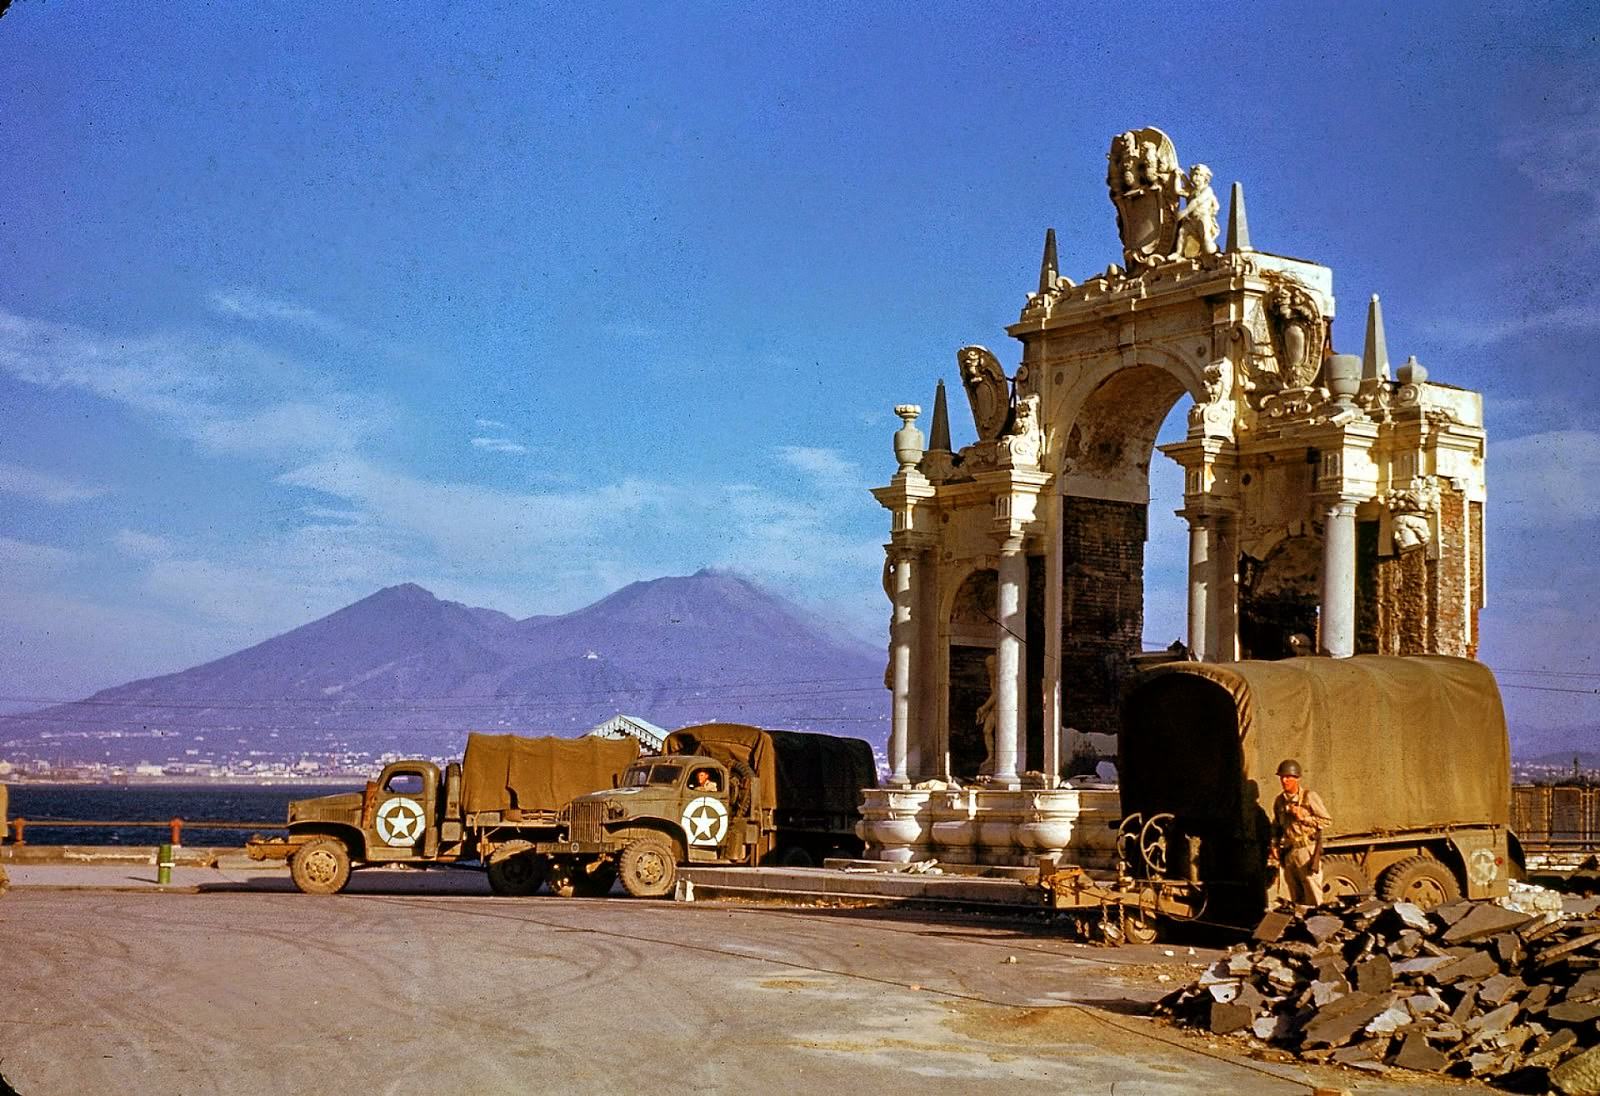 American Army trucks parked next to the St. Lucia fountain in 1943.